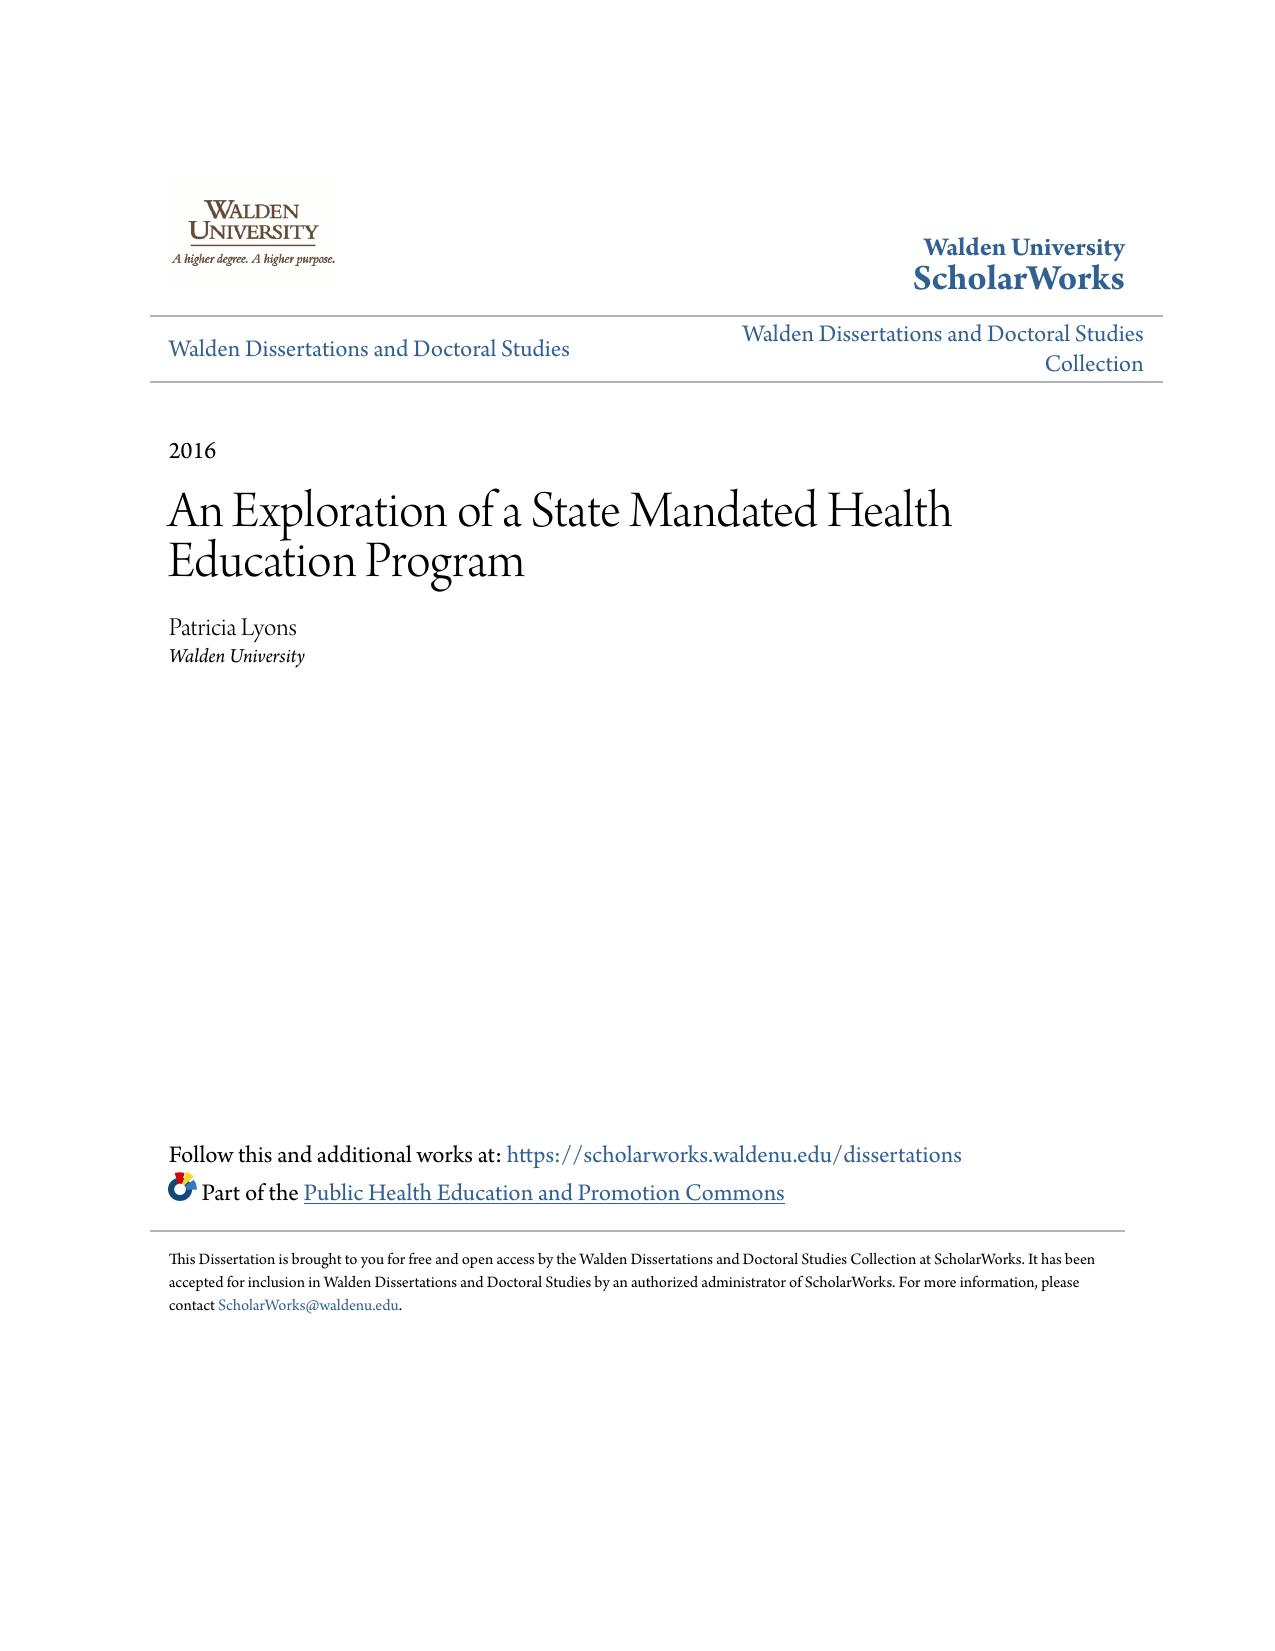 An Exploration of a State Mandated Health Education Program